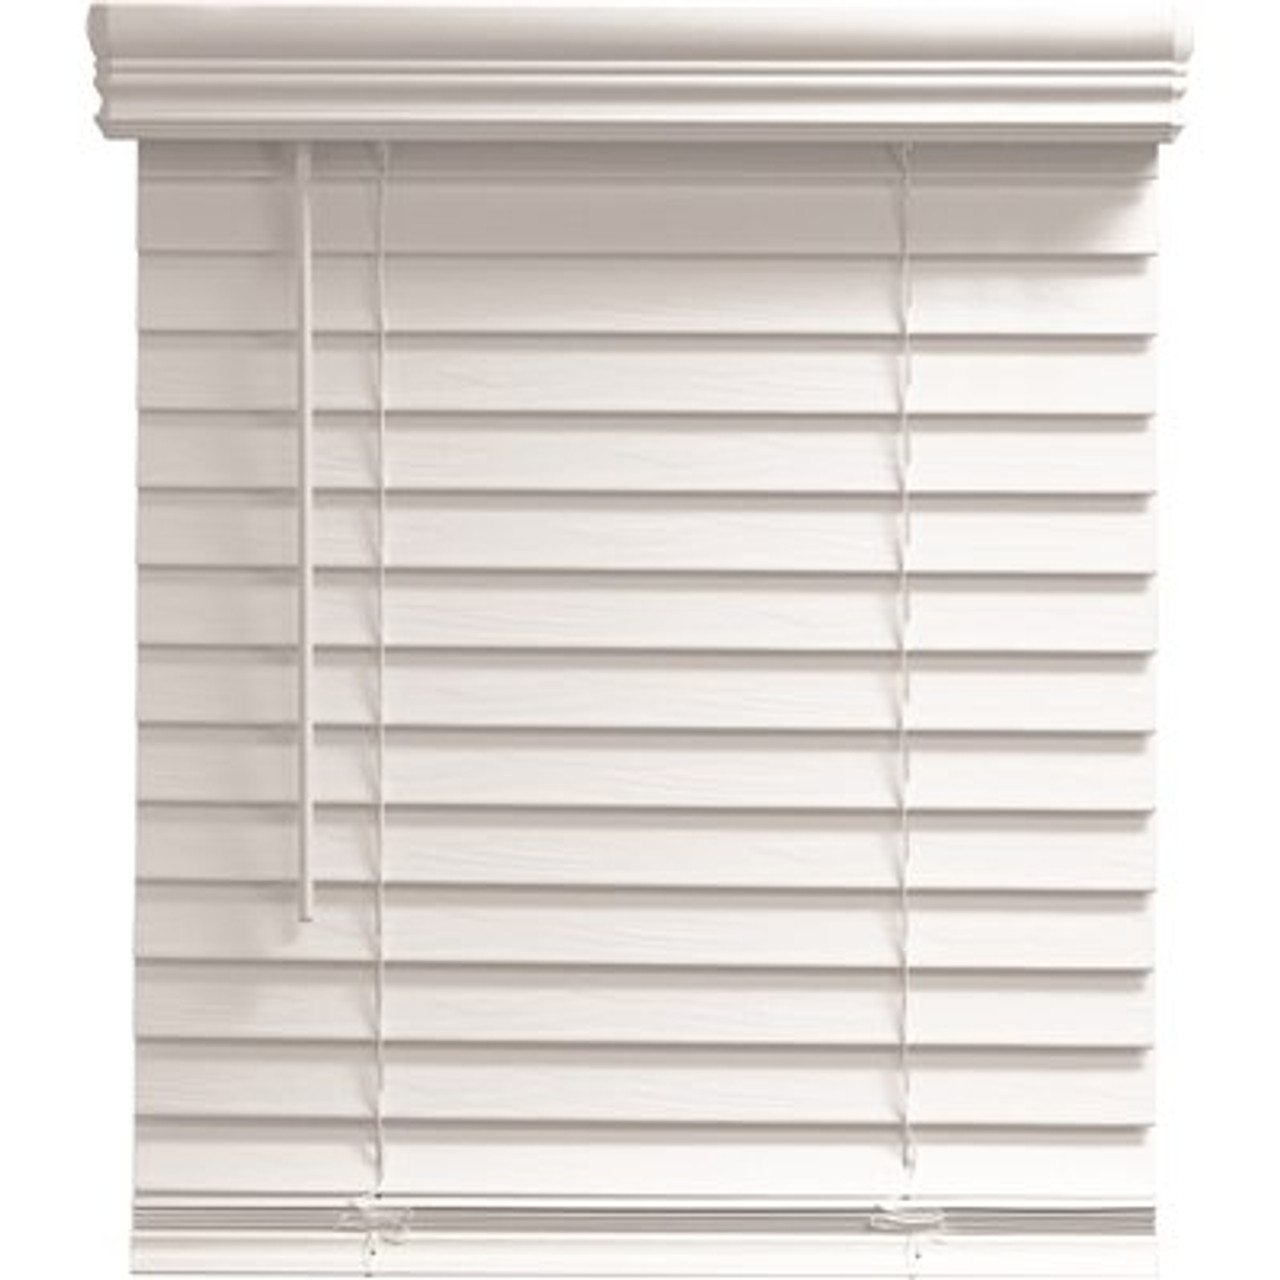 Champion TruTouch 31x60" Cordless 2" Faux Wood Blind White